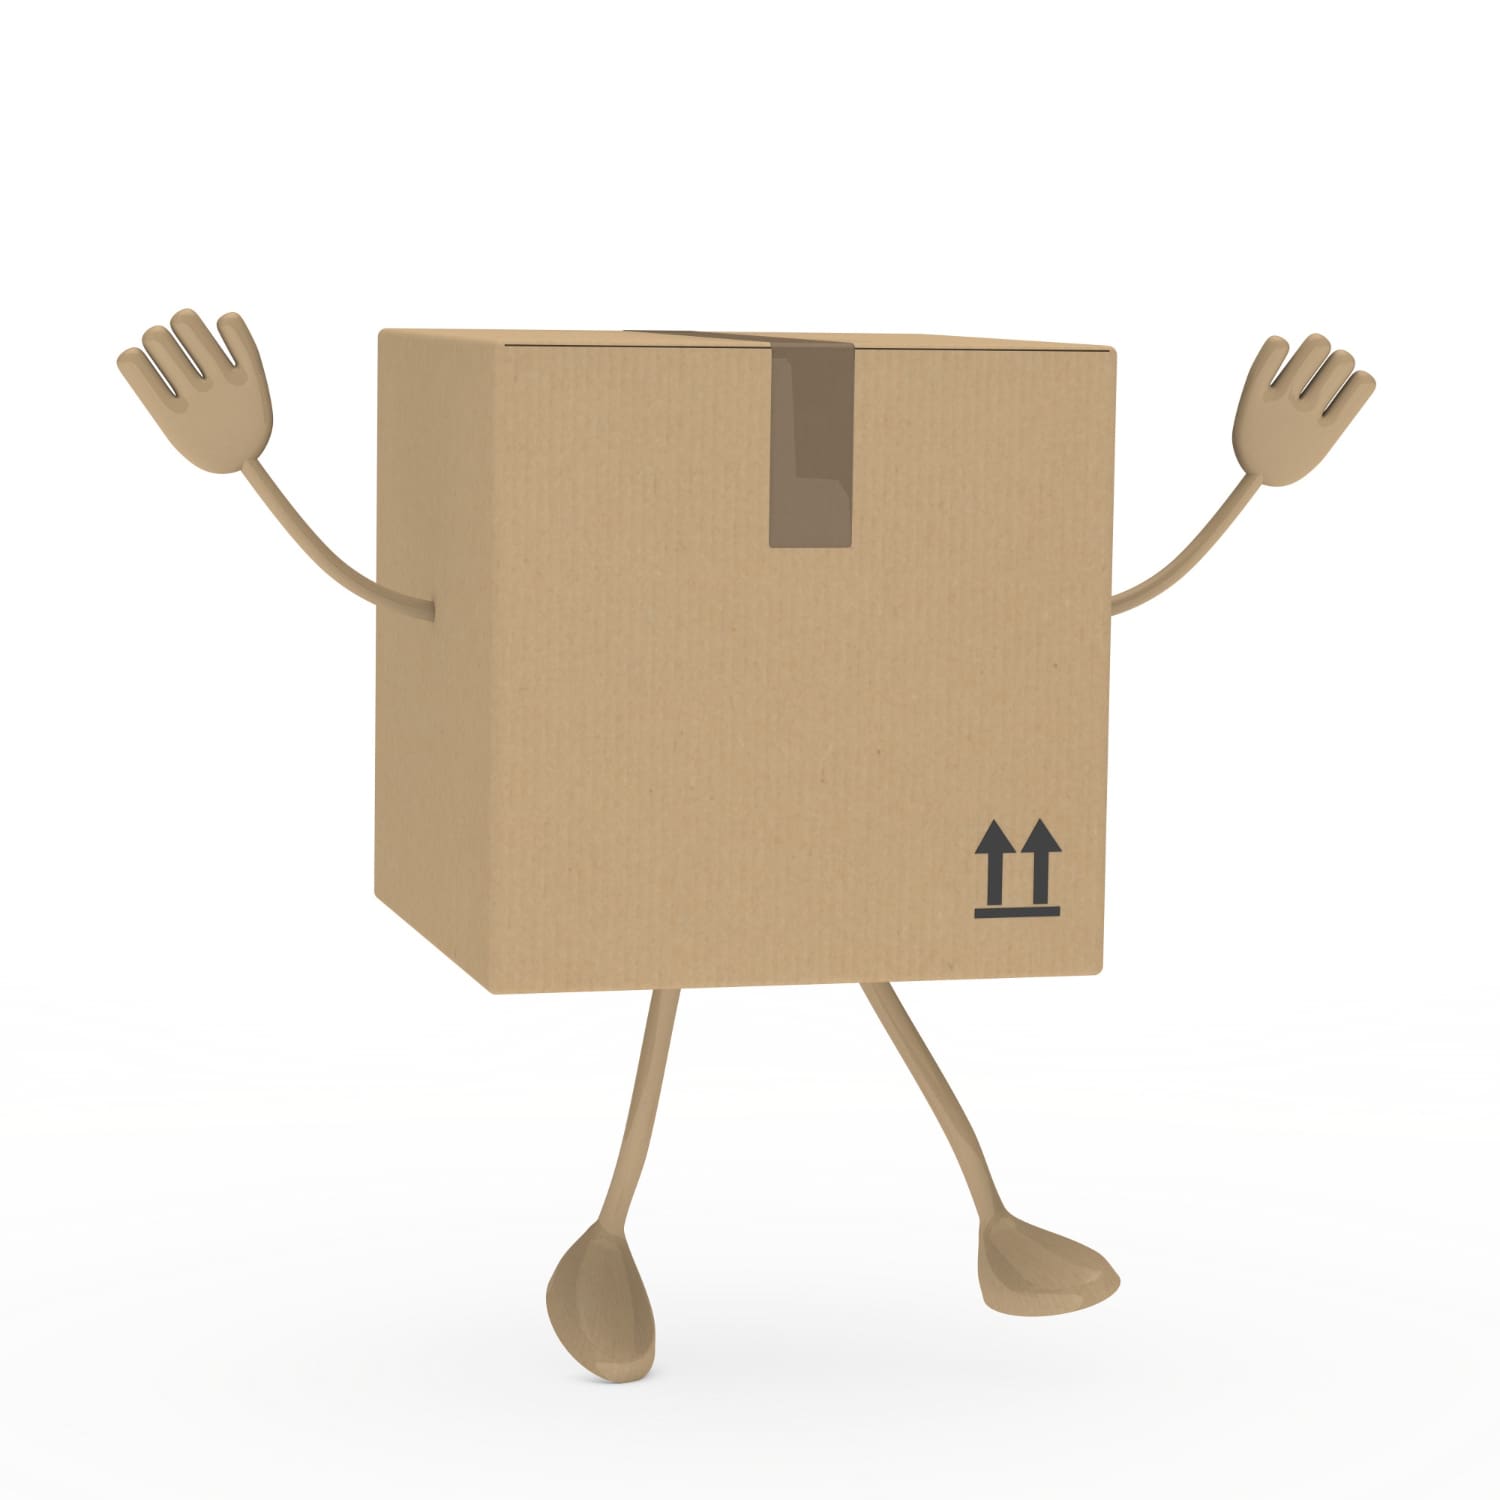 3d box jumping with arms up